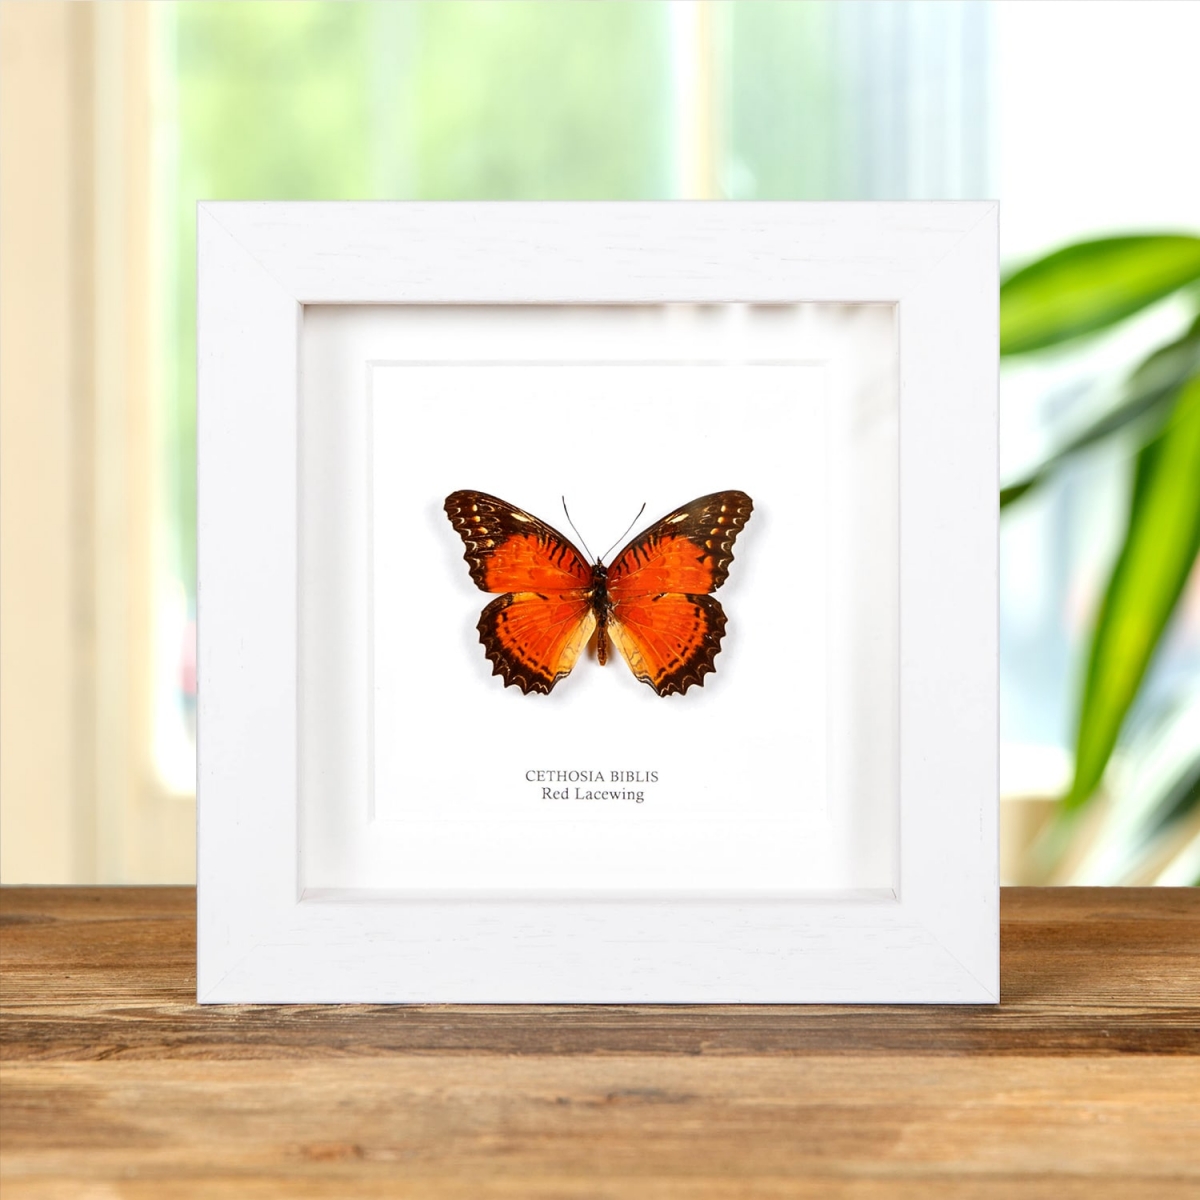 Red Lacewing in Box Frame (Cethosia biblis)